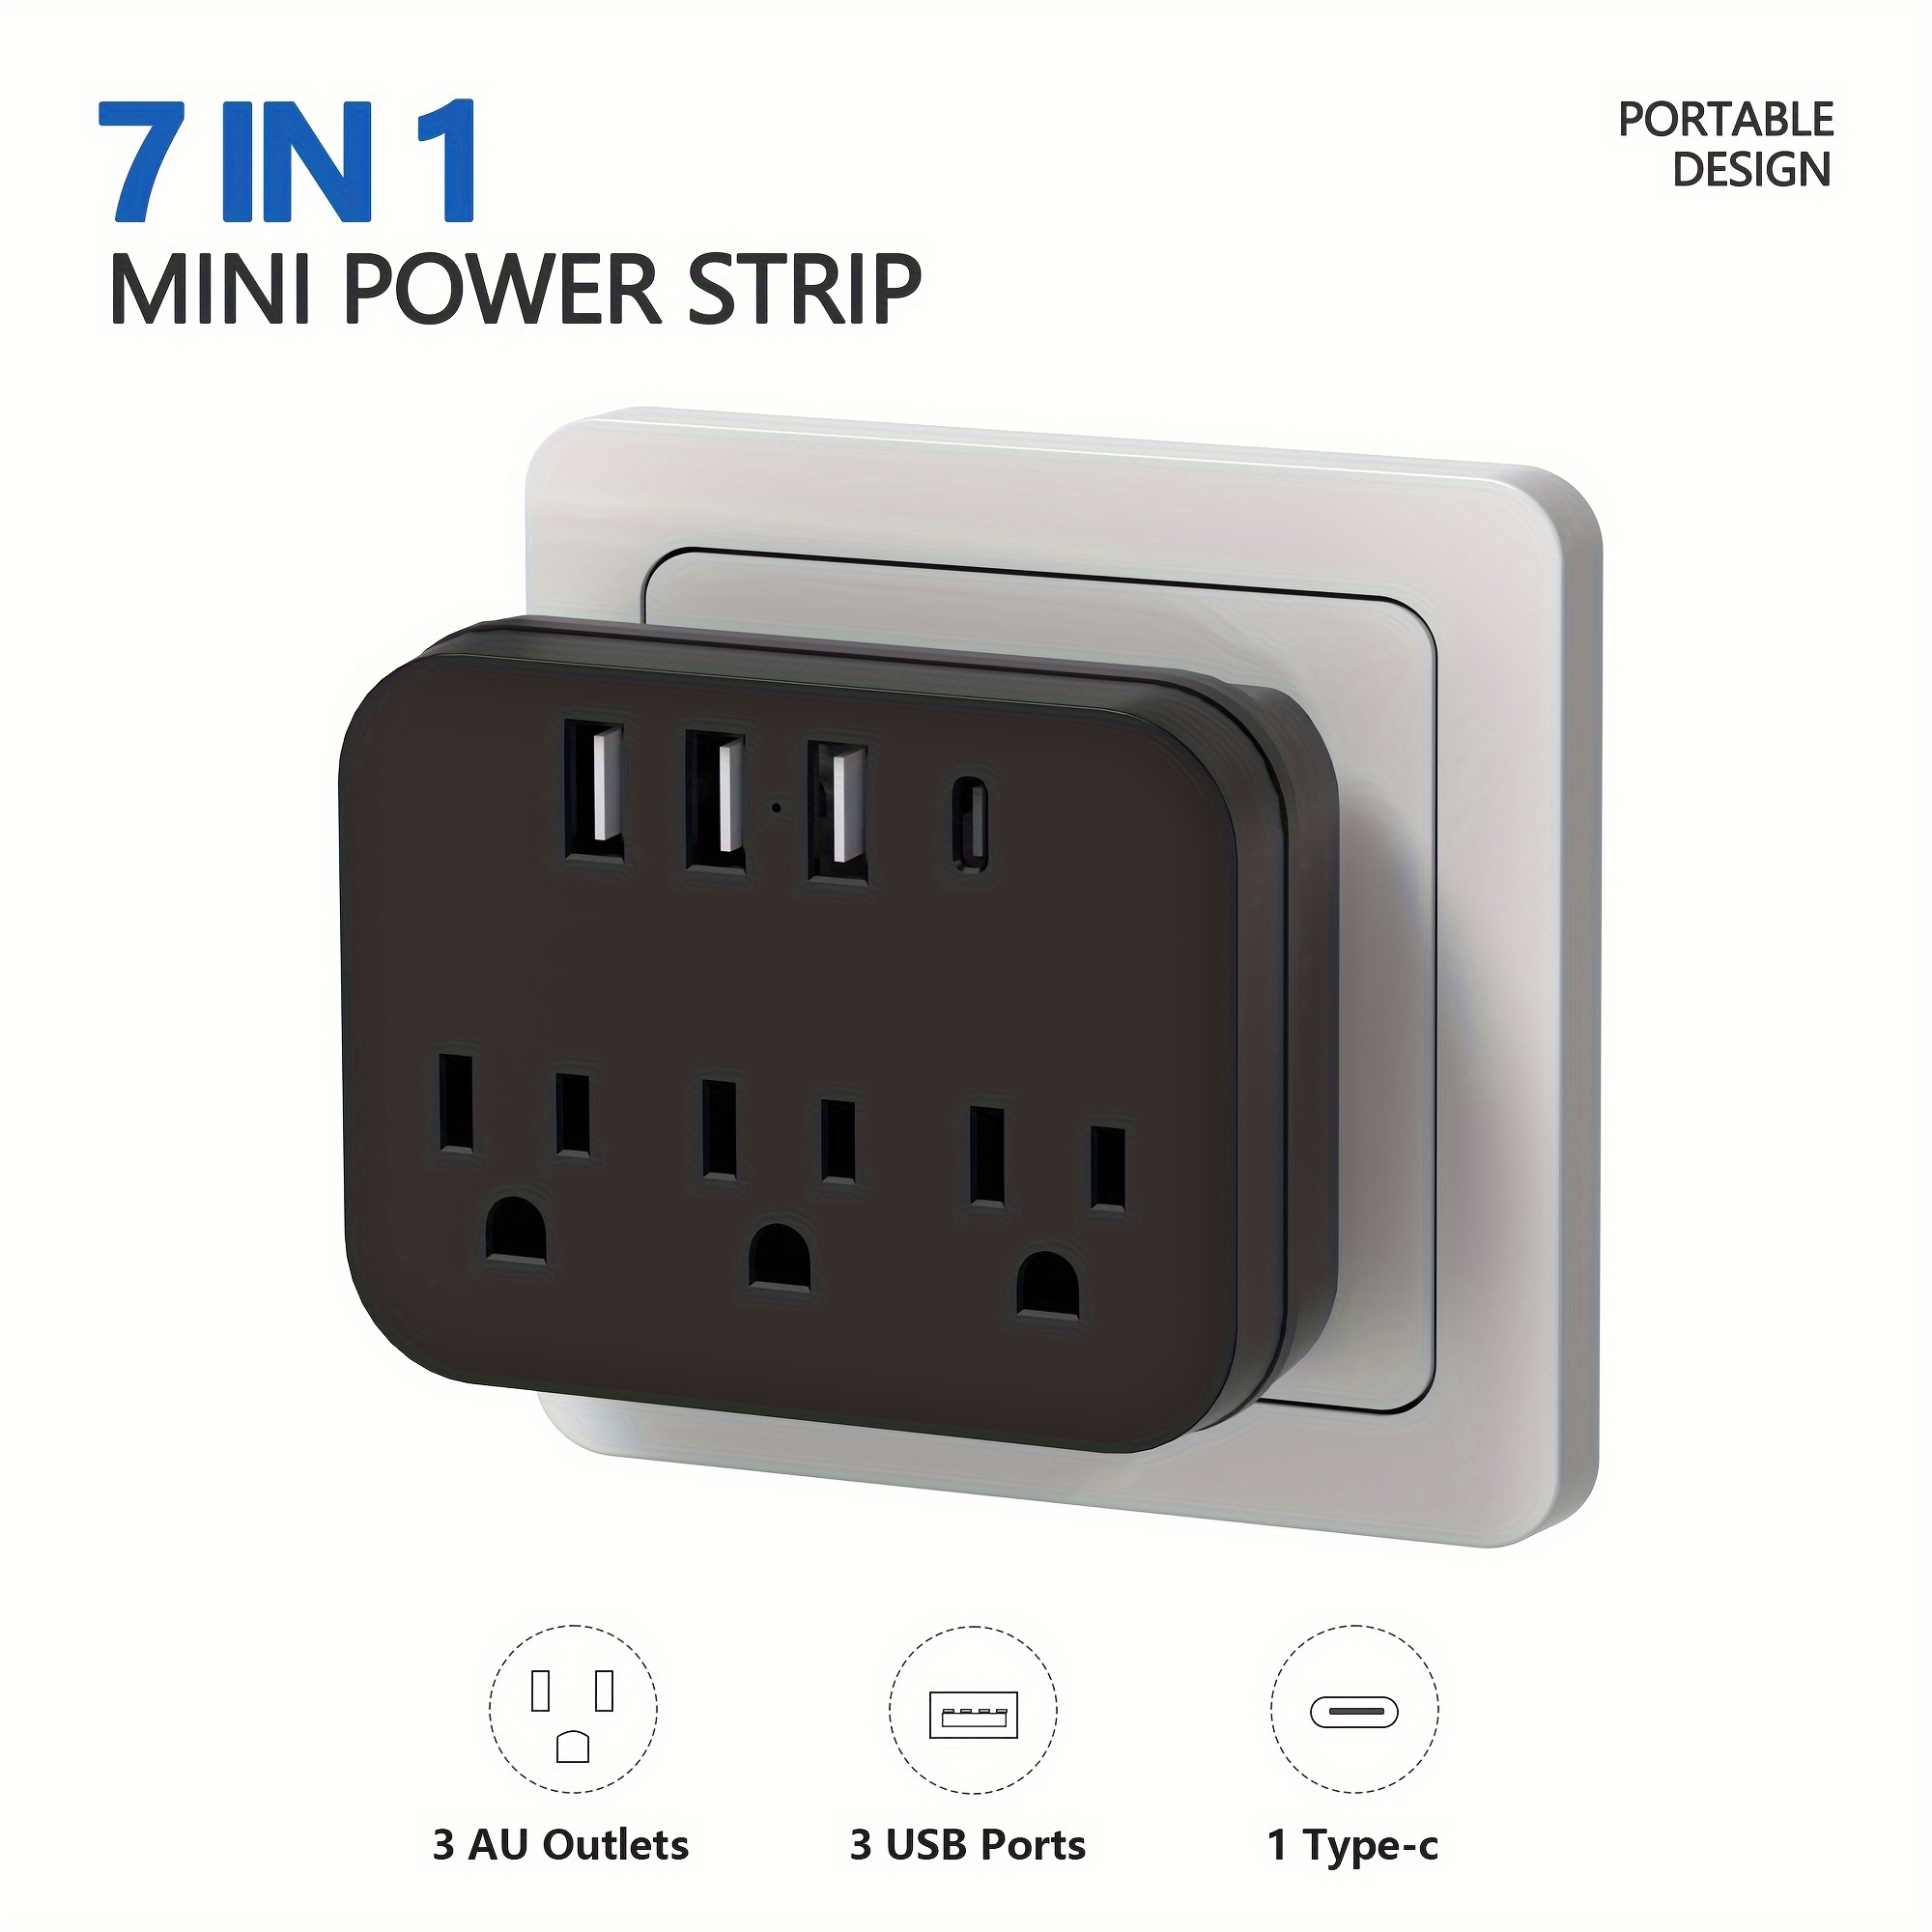 

1pc 7-in-1 Mini Power Adapter With 3 Ac Outlets, 3 Usb And 1 Type-c. Sturdy, Durable And Portable. A Multi-outlet Wall Socket. Perfect Must-have For Travel, Office And Home. Color In Black And White.